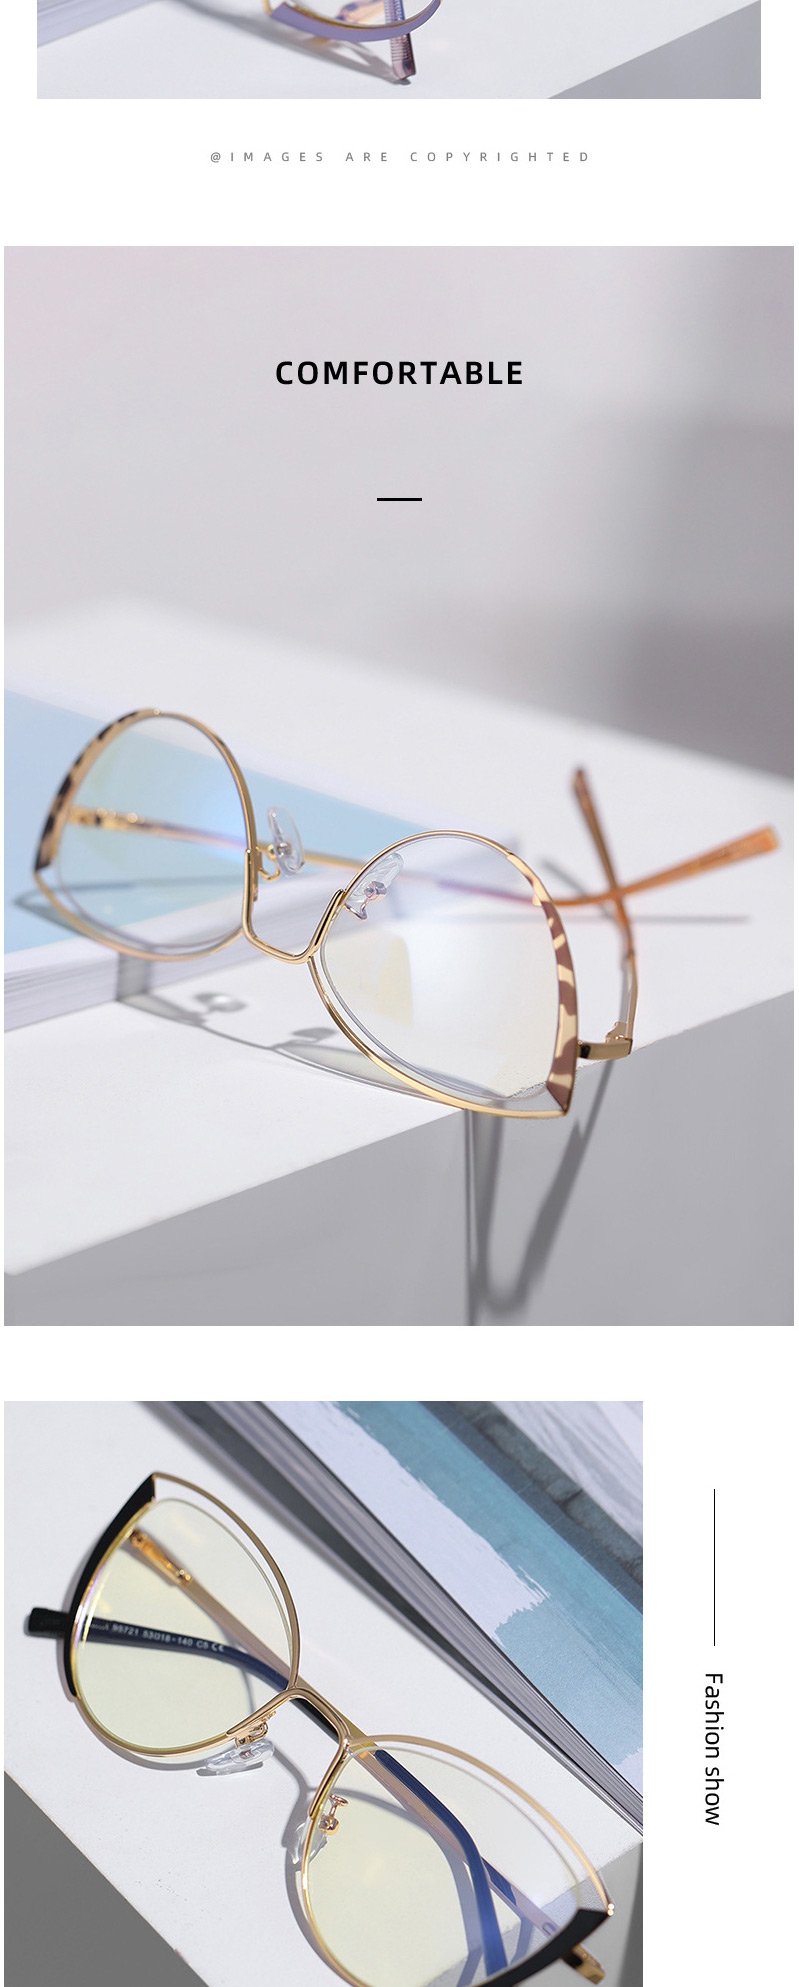 Fashion C7 Bean Paste/anti-blue Light Anti-blue Light Can Be Equipped With Myopia Metal Flat Mirror,Fashion Glasses